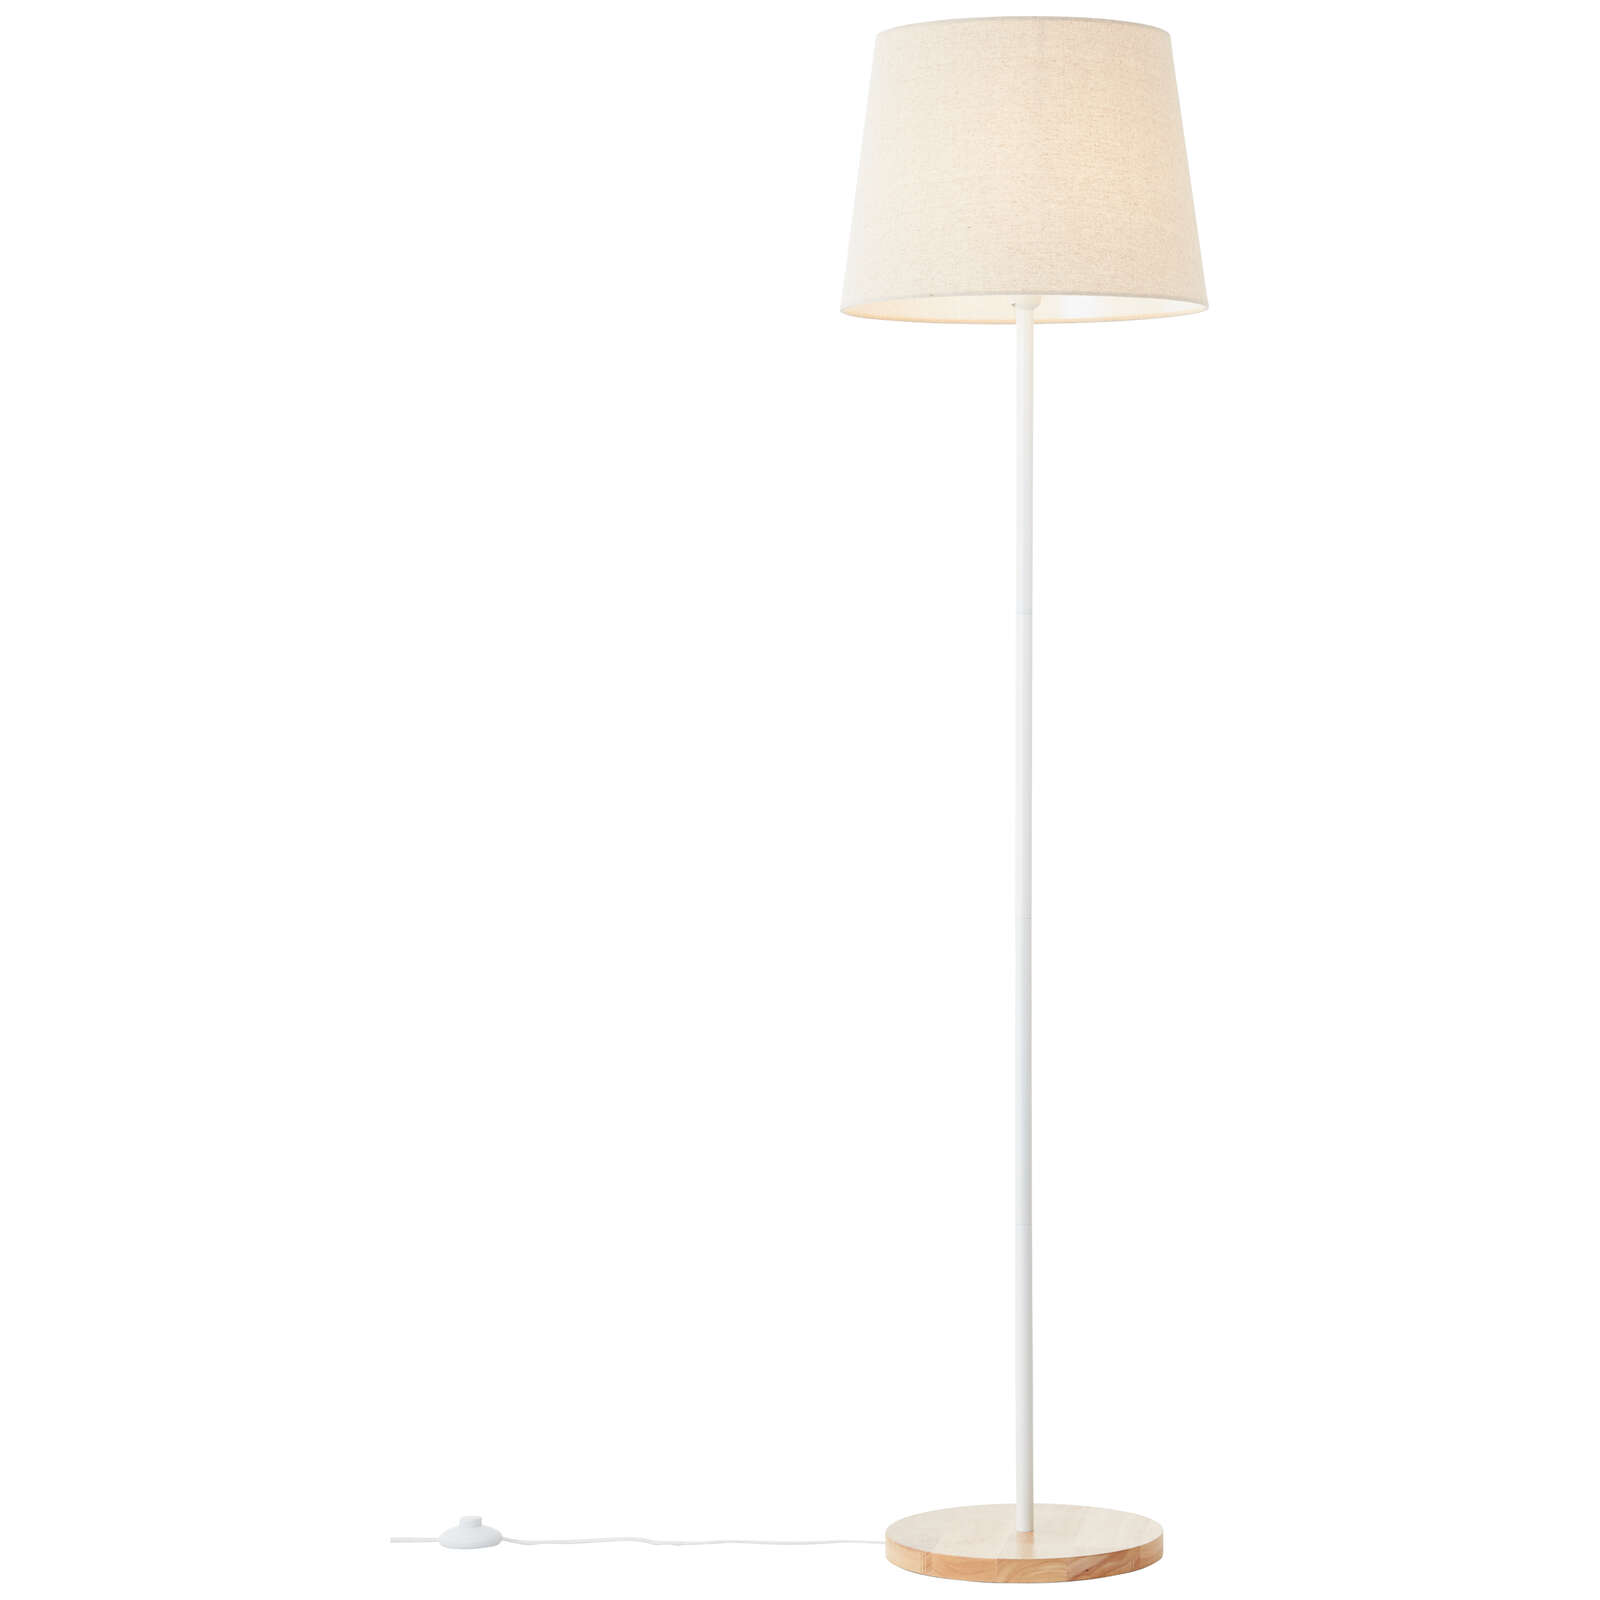             Floor lamp made of textile - Lenni 2 - Brown
        